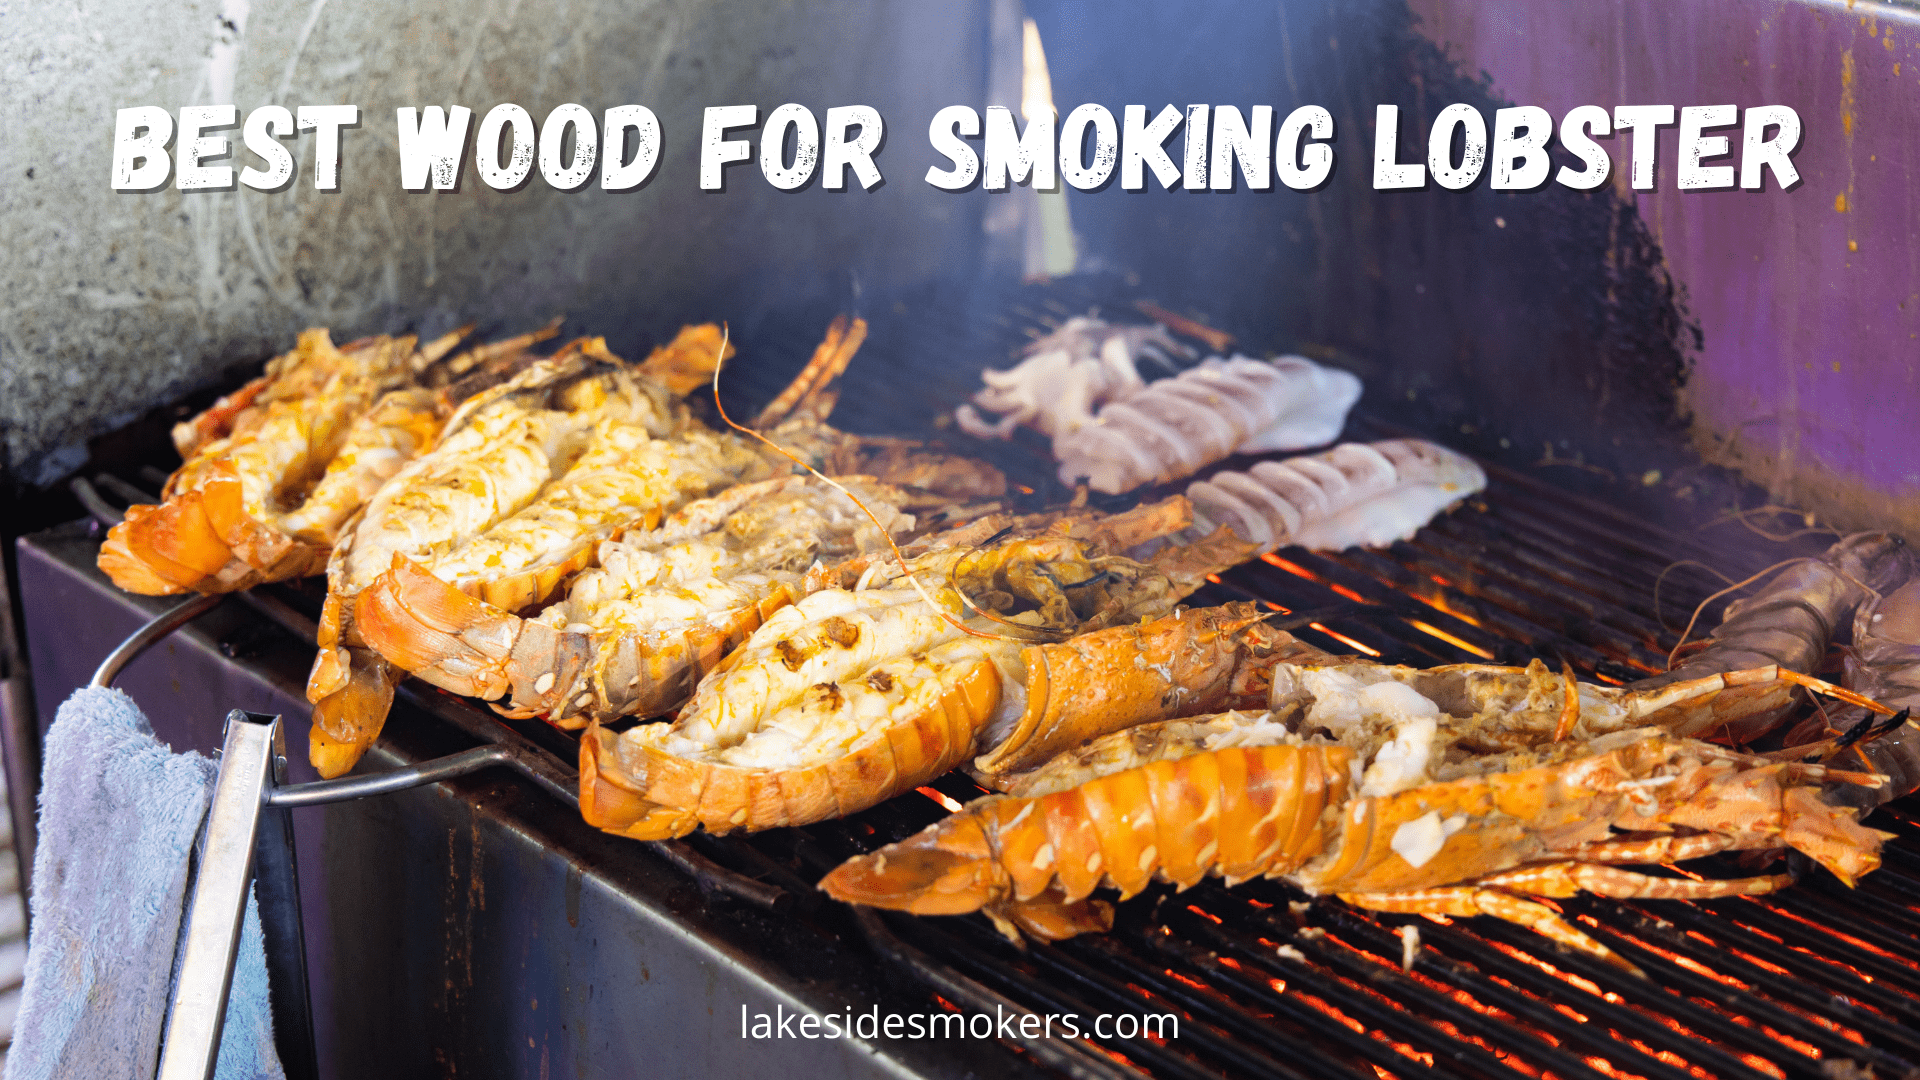 Best wood for smoking lobster | My favorite choices for great flavor